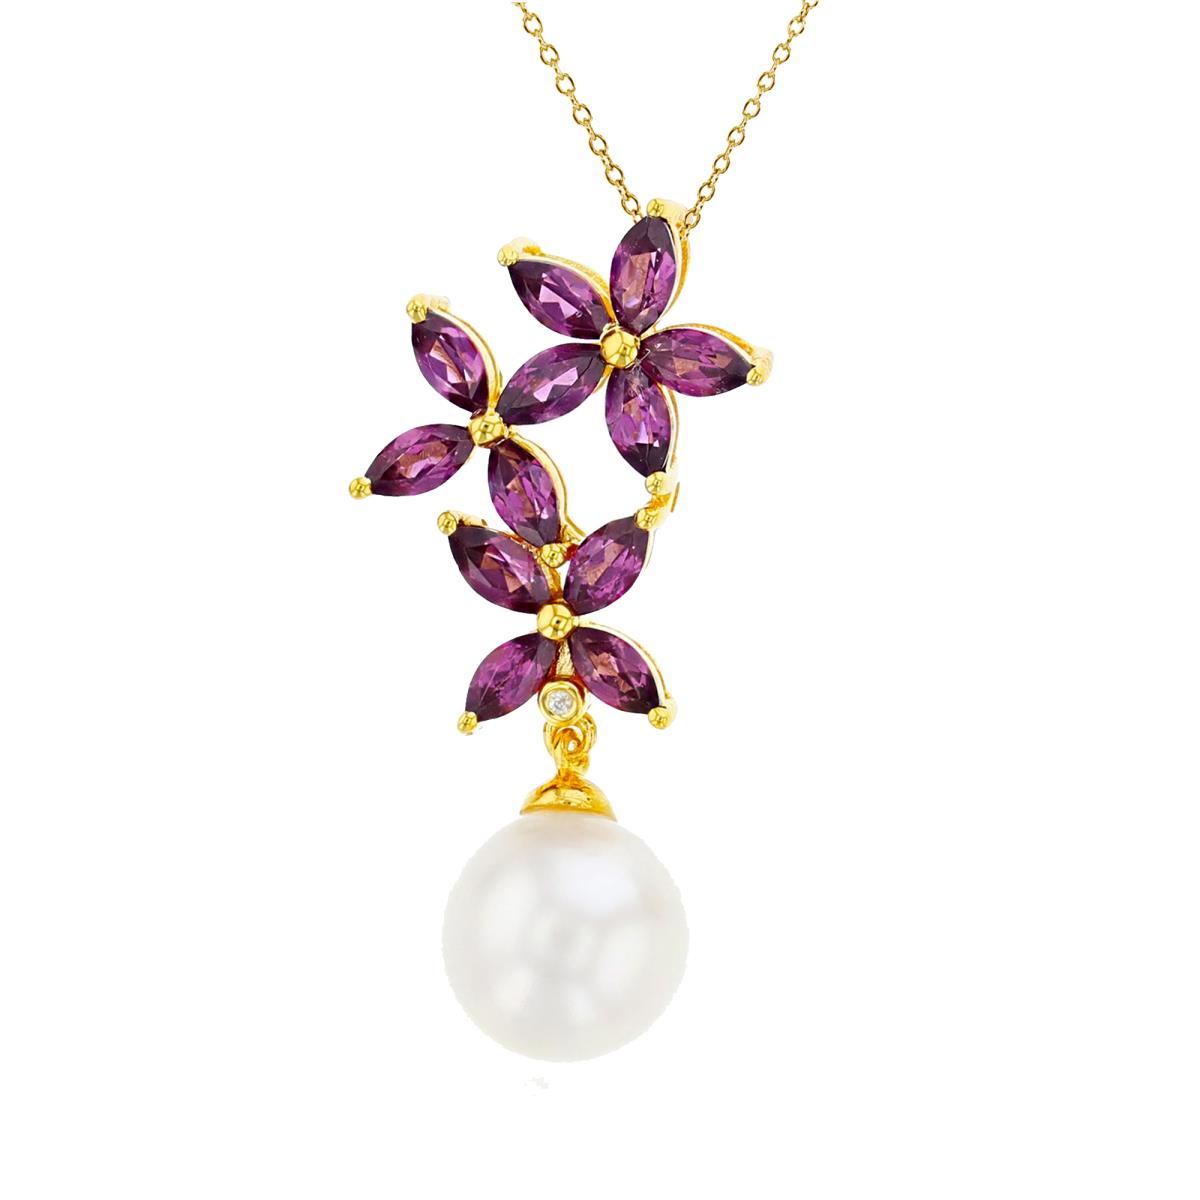 Sterling Silver +1Micron 14KY Gold Plating 8mm Rnd Pearl & 4x2mm MQ Rhodolite Flower Dangling 18"Necklace